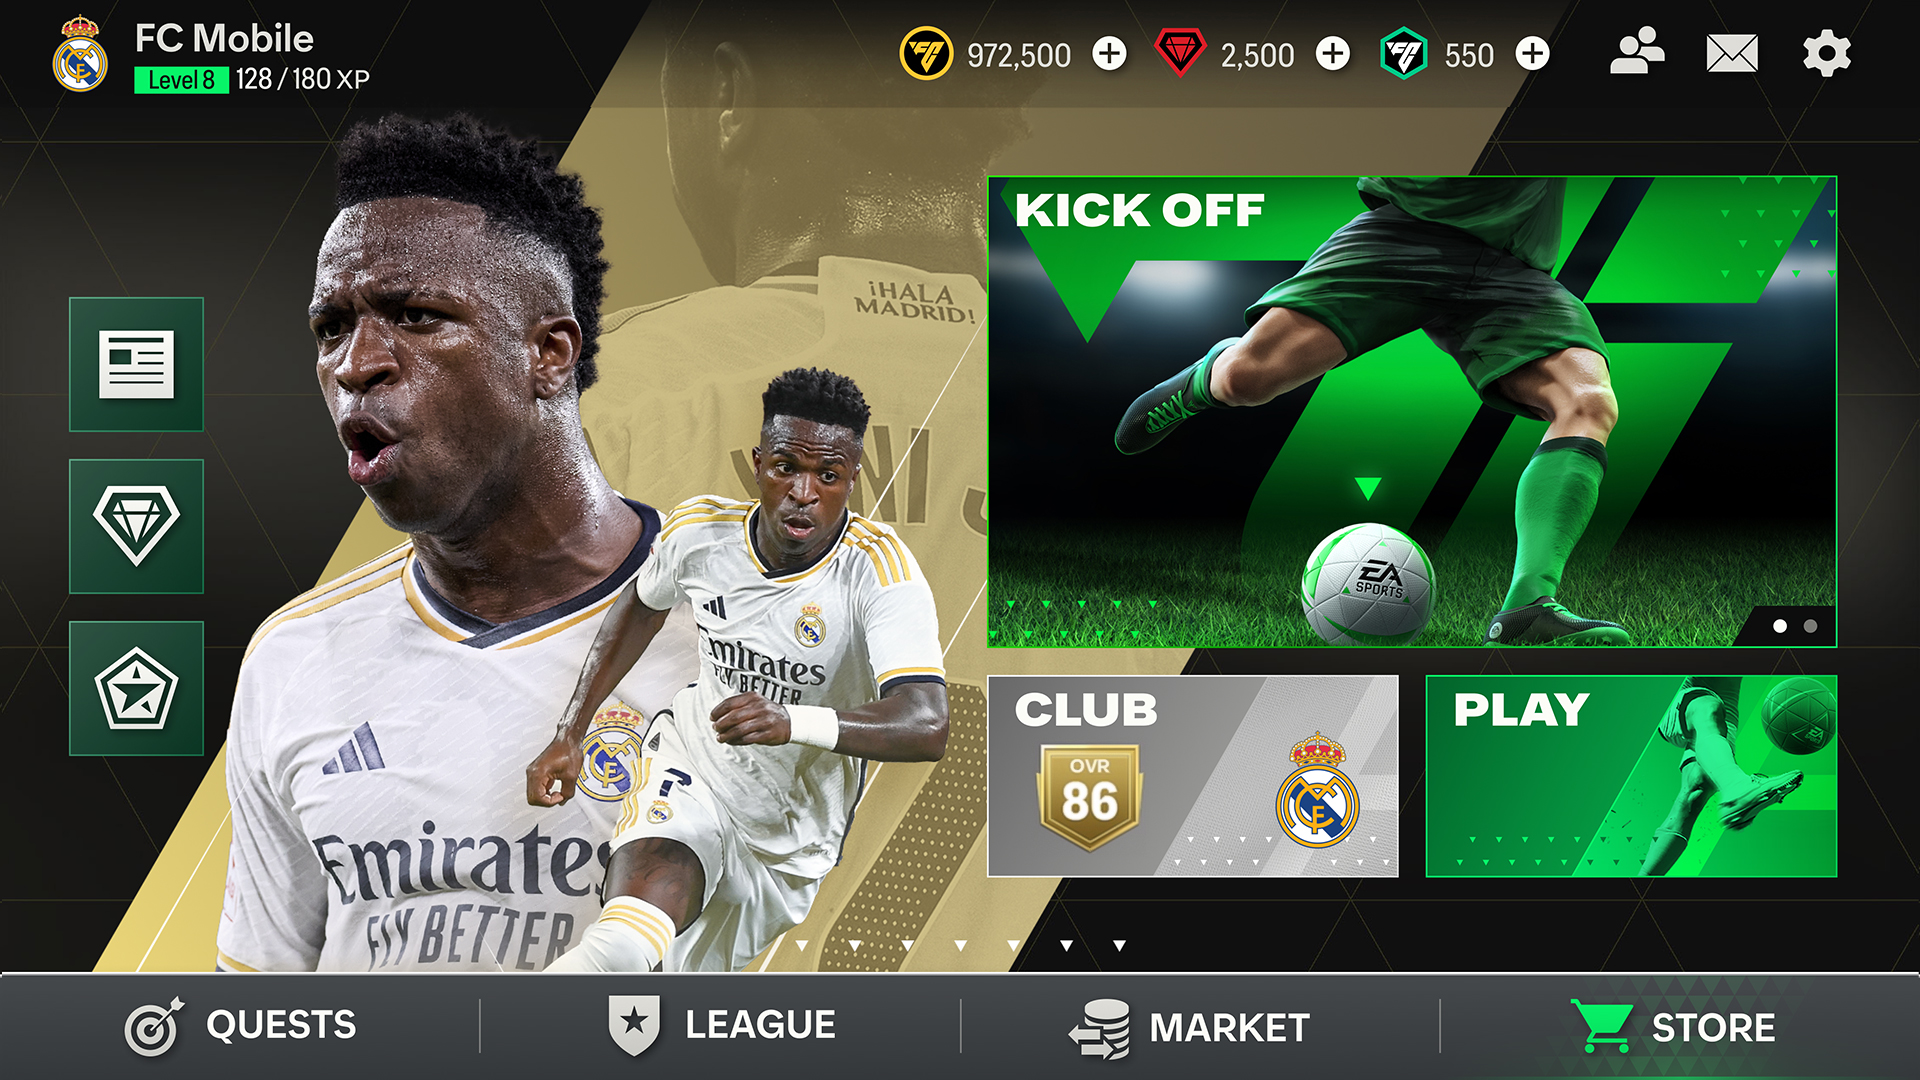 EA SPORTS FC MOBILE on X: It's here. #FCMobile has now launched! 🔥 Update  your game and play EA SPORTS FC™ Mobile now! 🙌 Android:   iOS:    / X